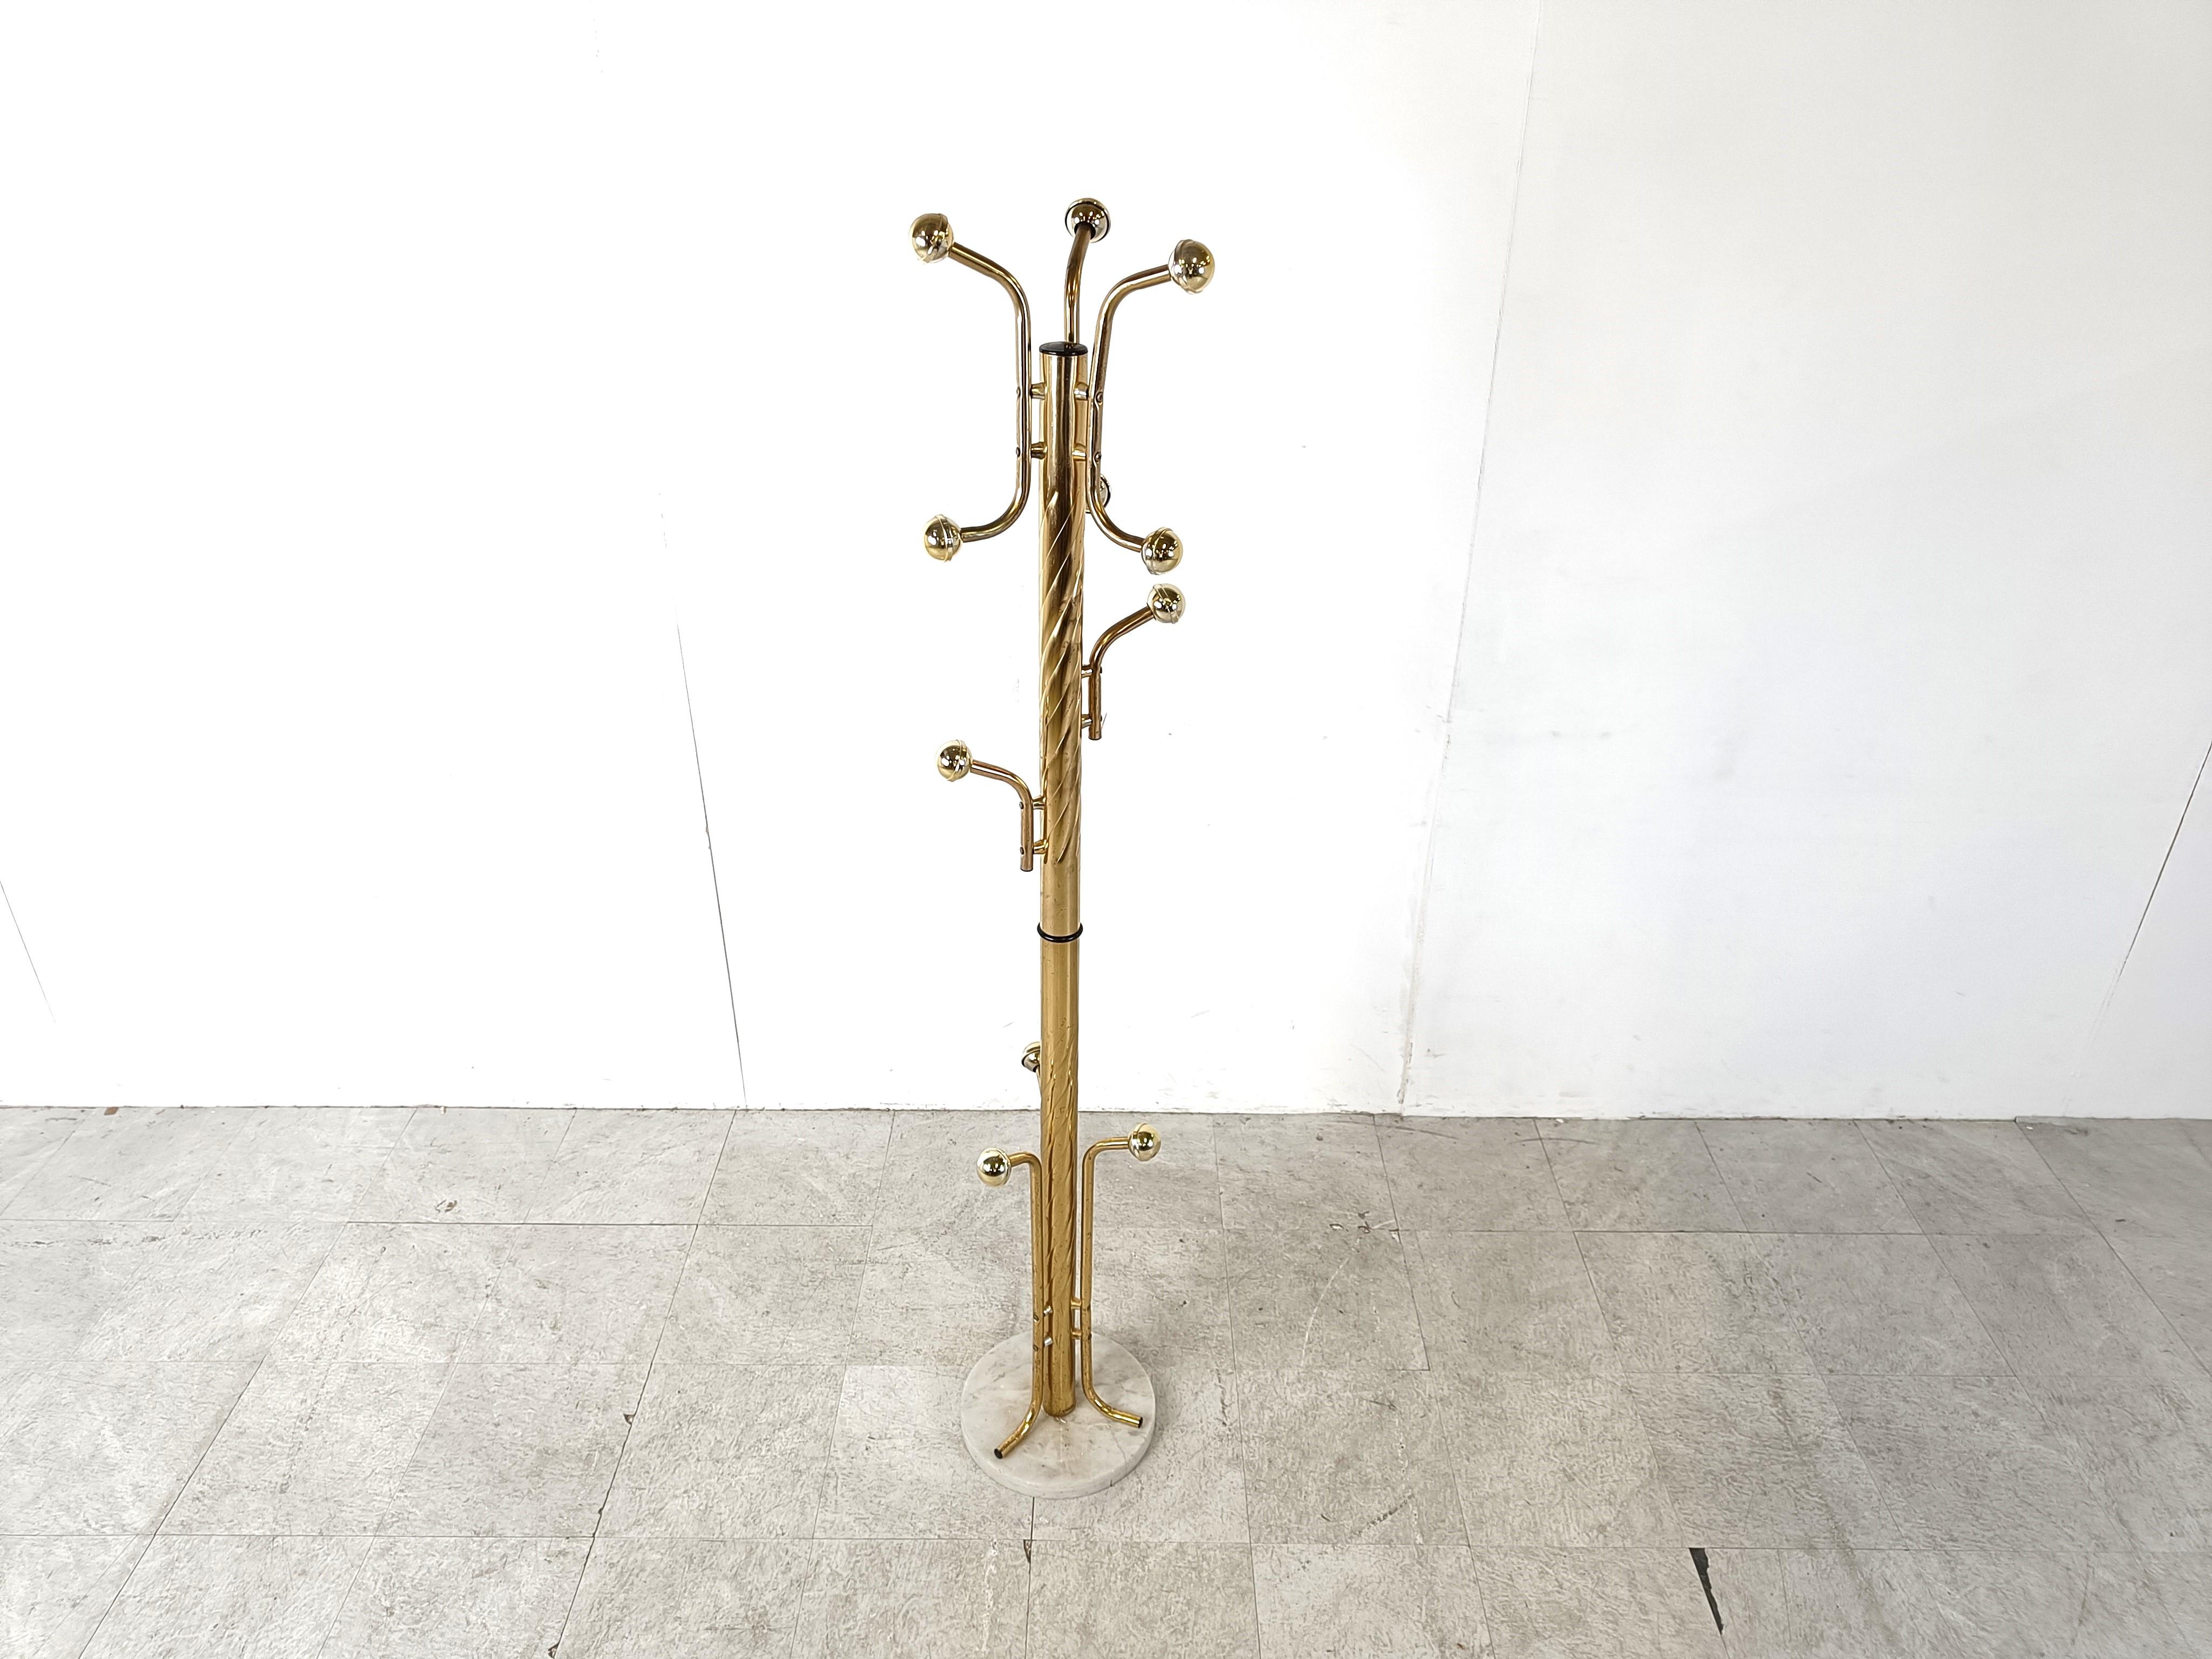 Mid century golden sputnik coat stand.

Original space age design and beautiful patina.

Lots of practical hooks and white marble base

1960s - France

Good condition.

Dimensions:
Height: 180cm/70.86